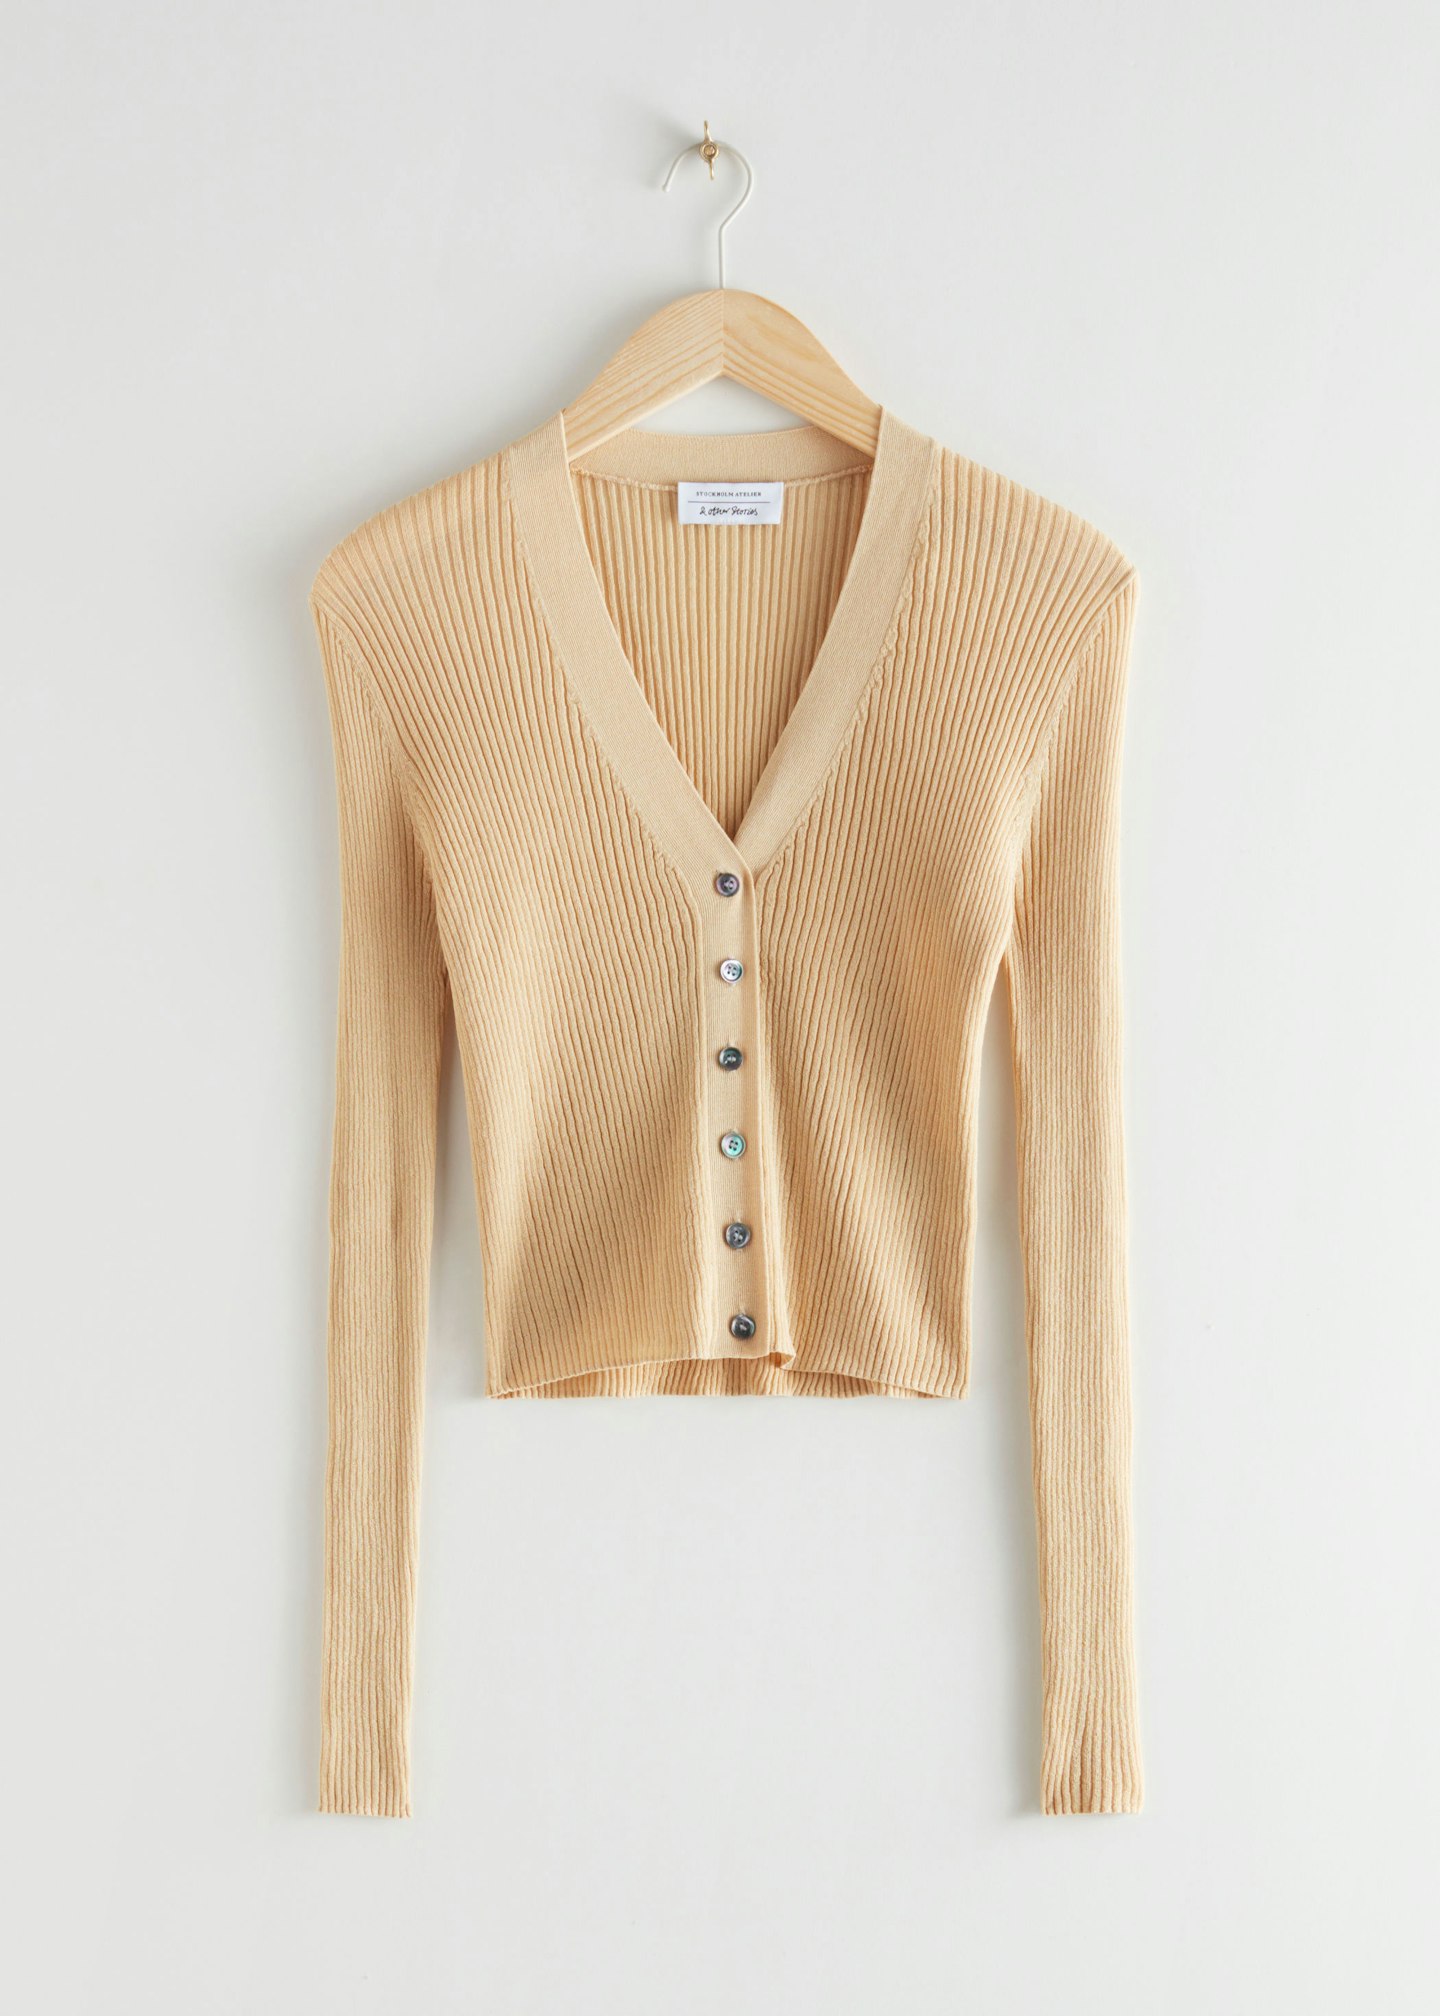 The Ribbed Cardi – & Other Stories, Cropped Ribbed Cardigan, £55